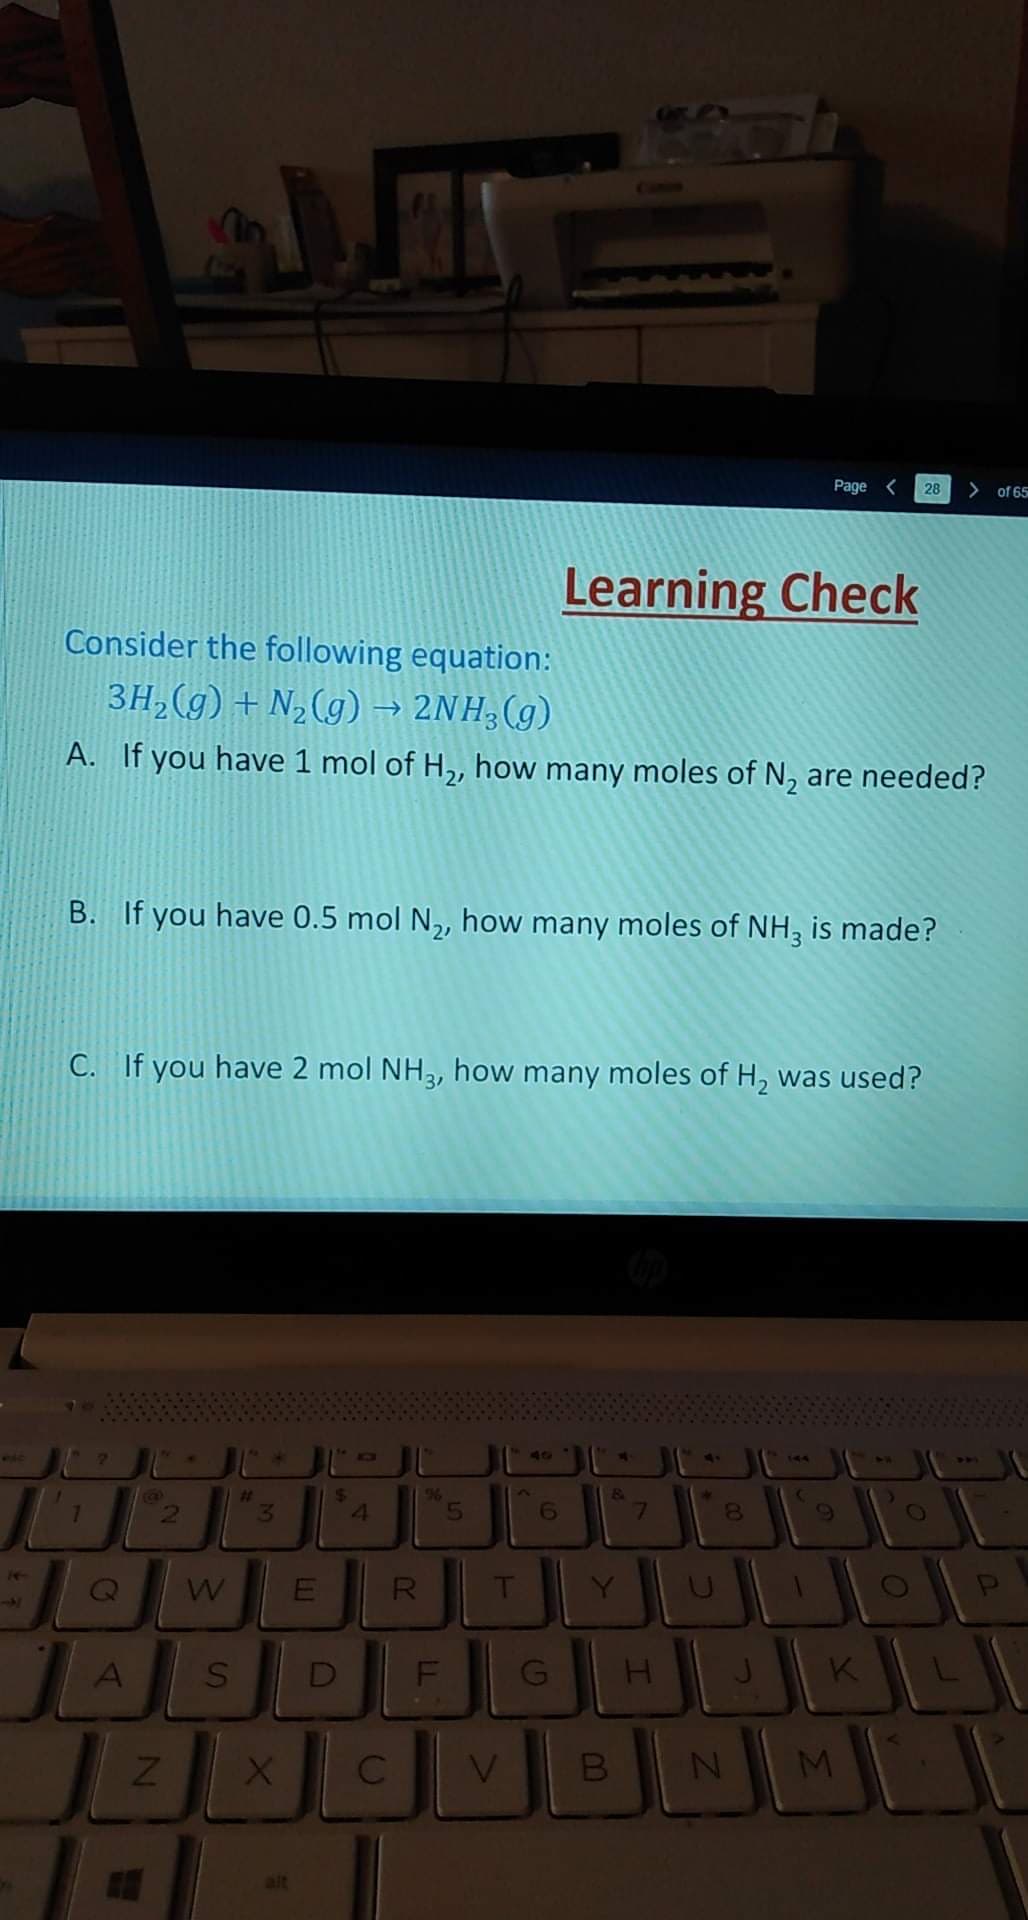 Page <
28
>
of 65
Learning Check
Consider the following equation:
3H,(g) + N,(g) → 2NH,(g)
A. If you have 1 mol of H,, how many moles of N, are needed?
B. If you have 0.5 mol N,, how many moles of NH, is made?
C. If you have 2 mol NH3, how many moles of H, was used?
VIC
40
S.
6
7.
R
D
K
M
CO
B
